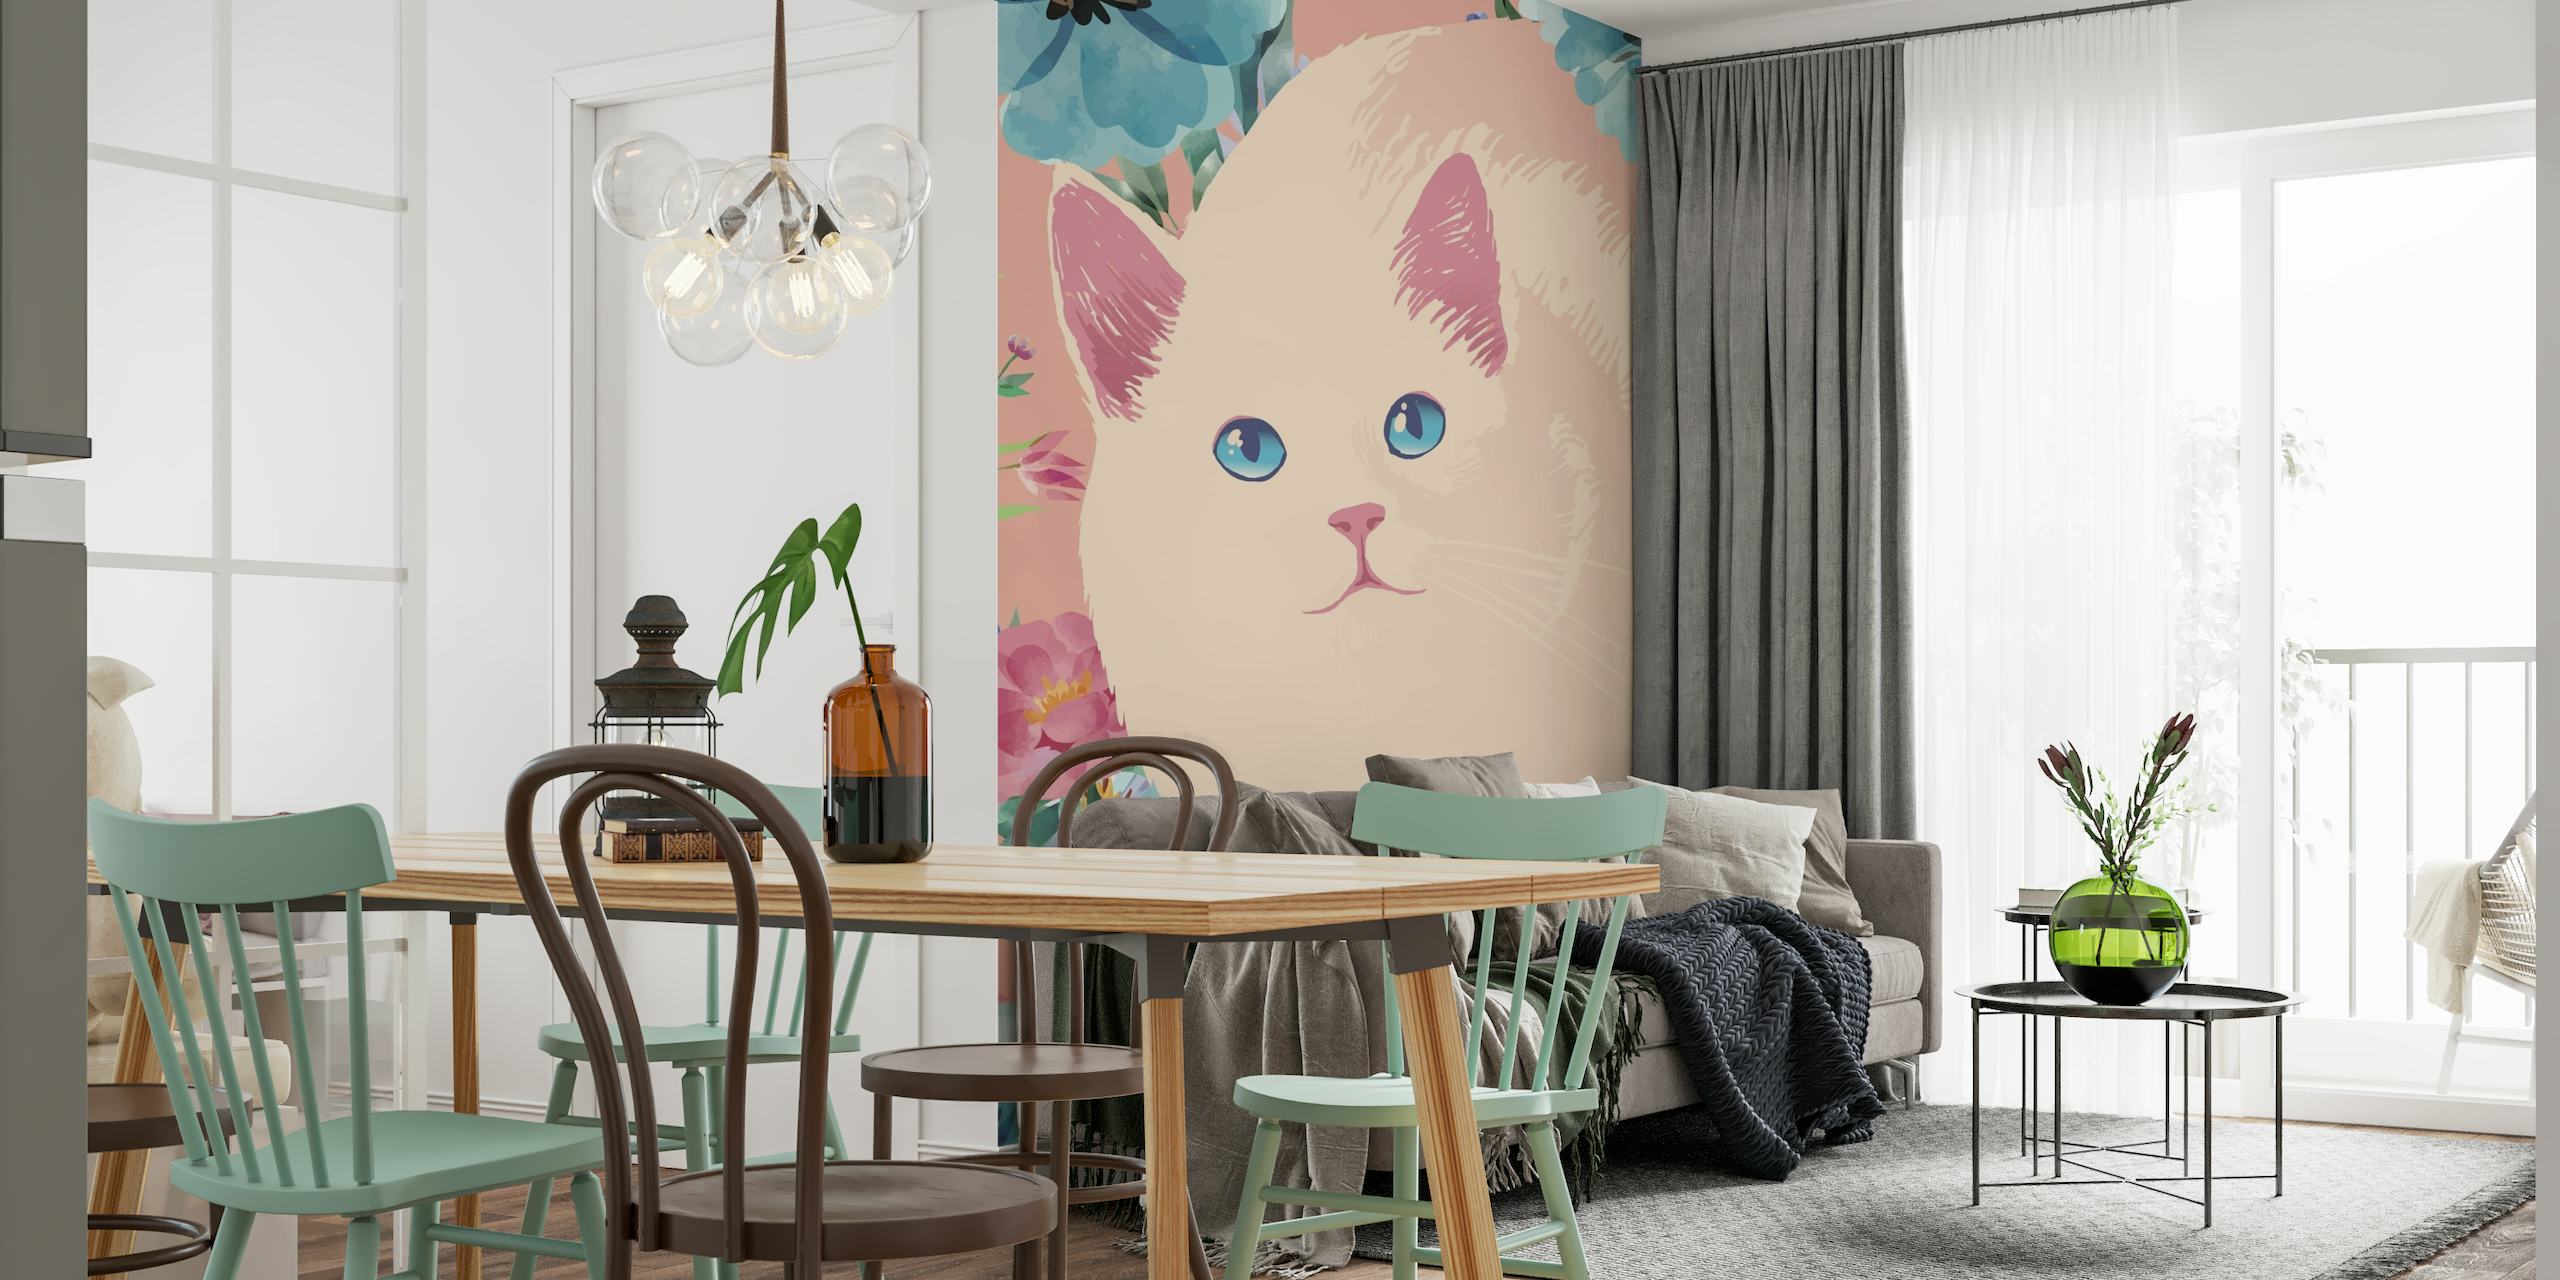 Whimsical 'Floral Cat Garden' wall mural with a pastel-colored fluffy cat amid blooming flowers